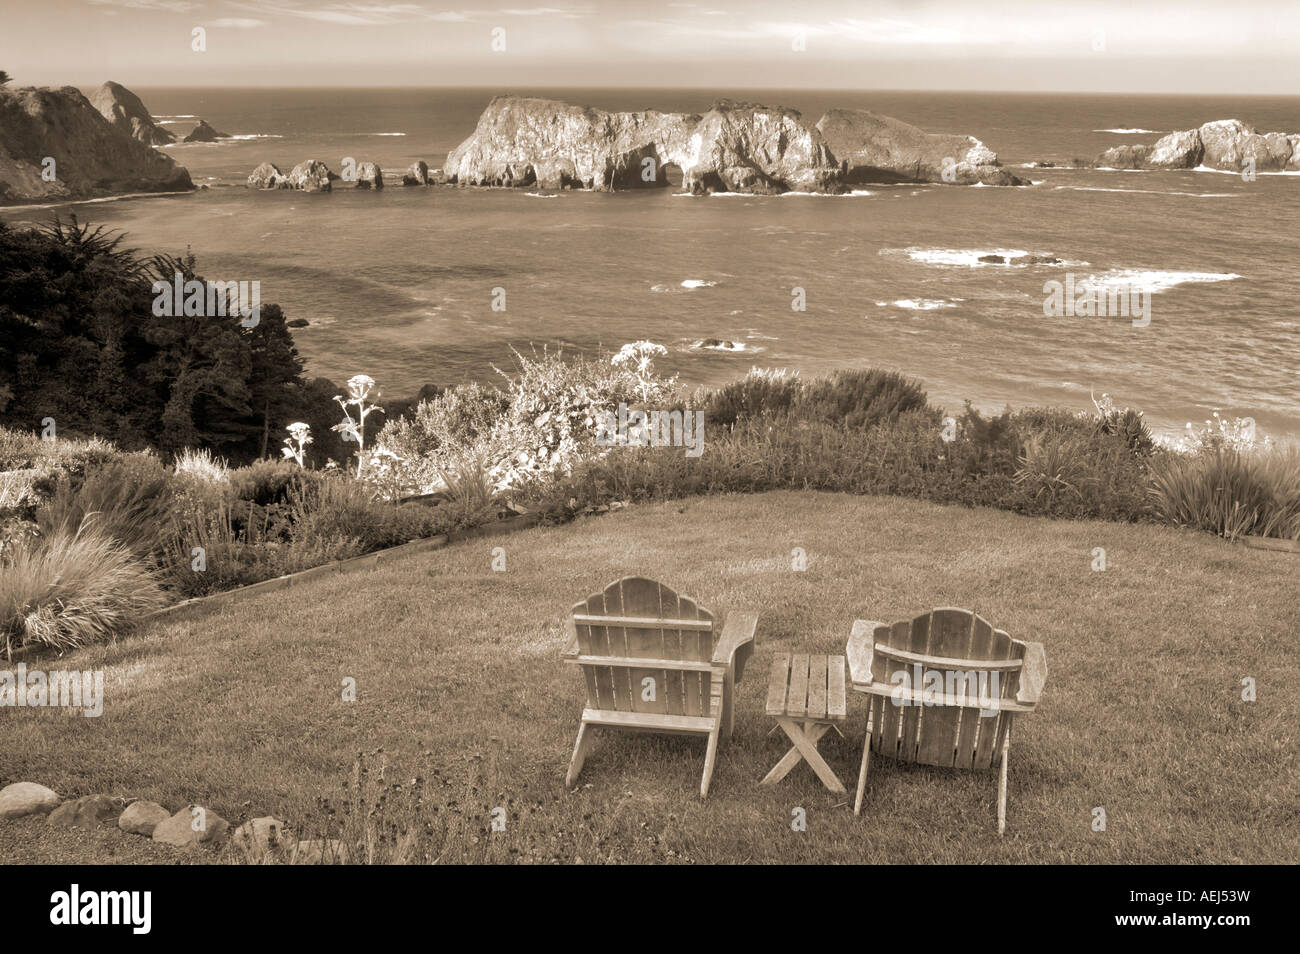 Two chairs on grass overlook at The Harbor House Inn Elk California Stock Photo